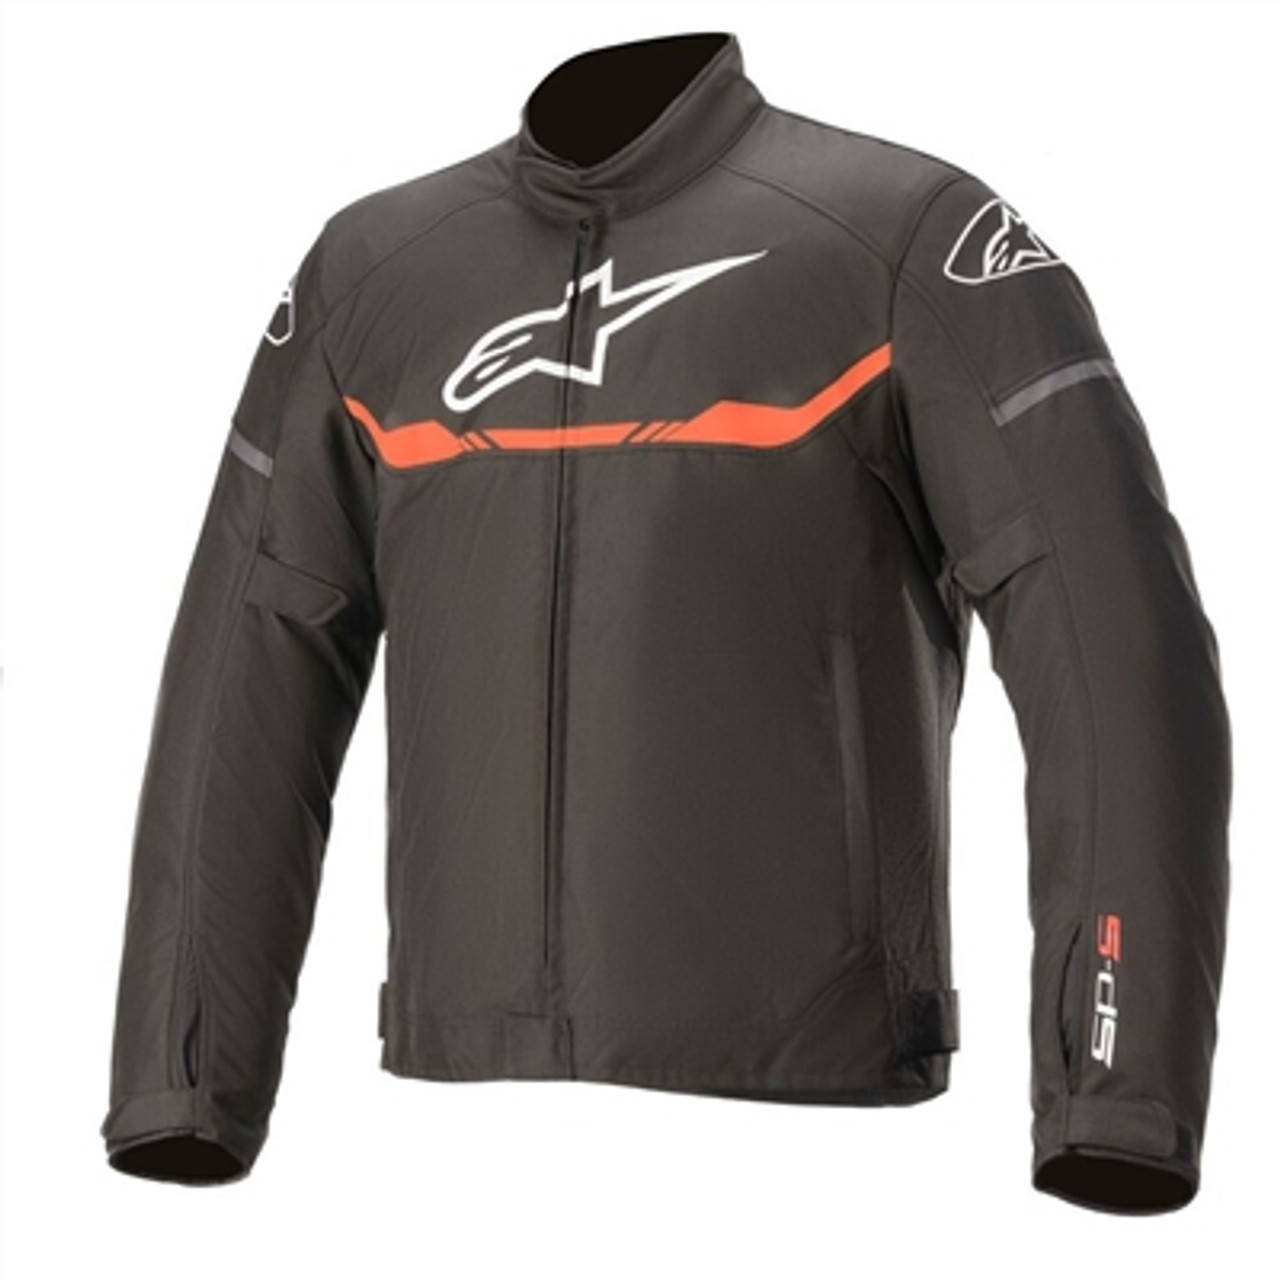 Alpinestars T-SPS Waterproof Jacket Black/Red available at Motocross Giant